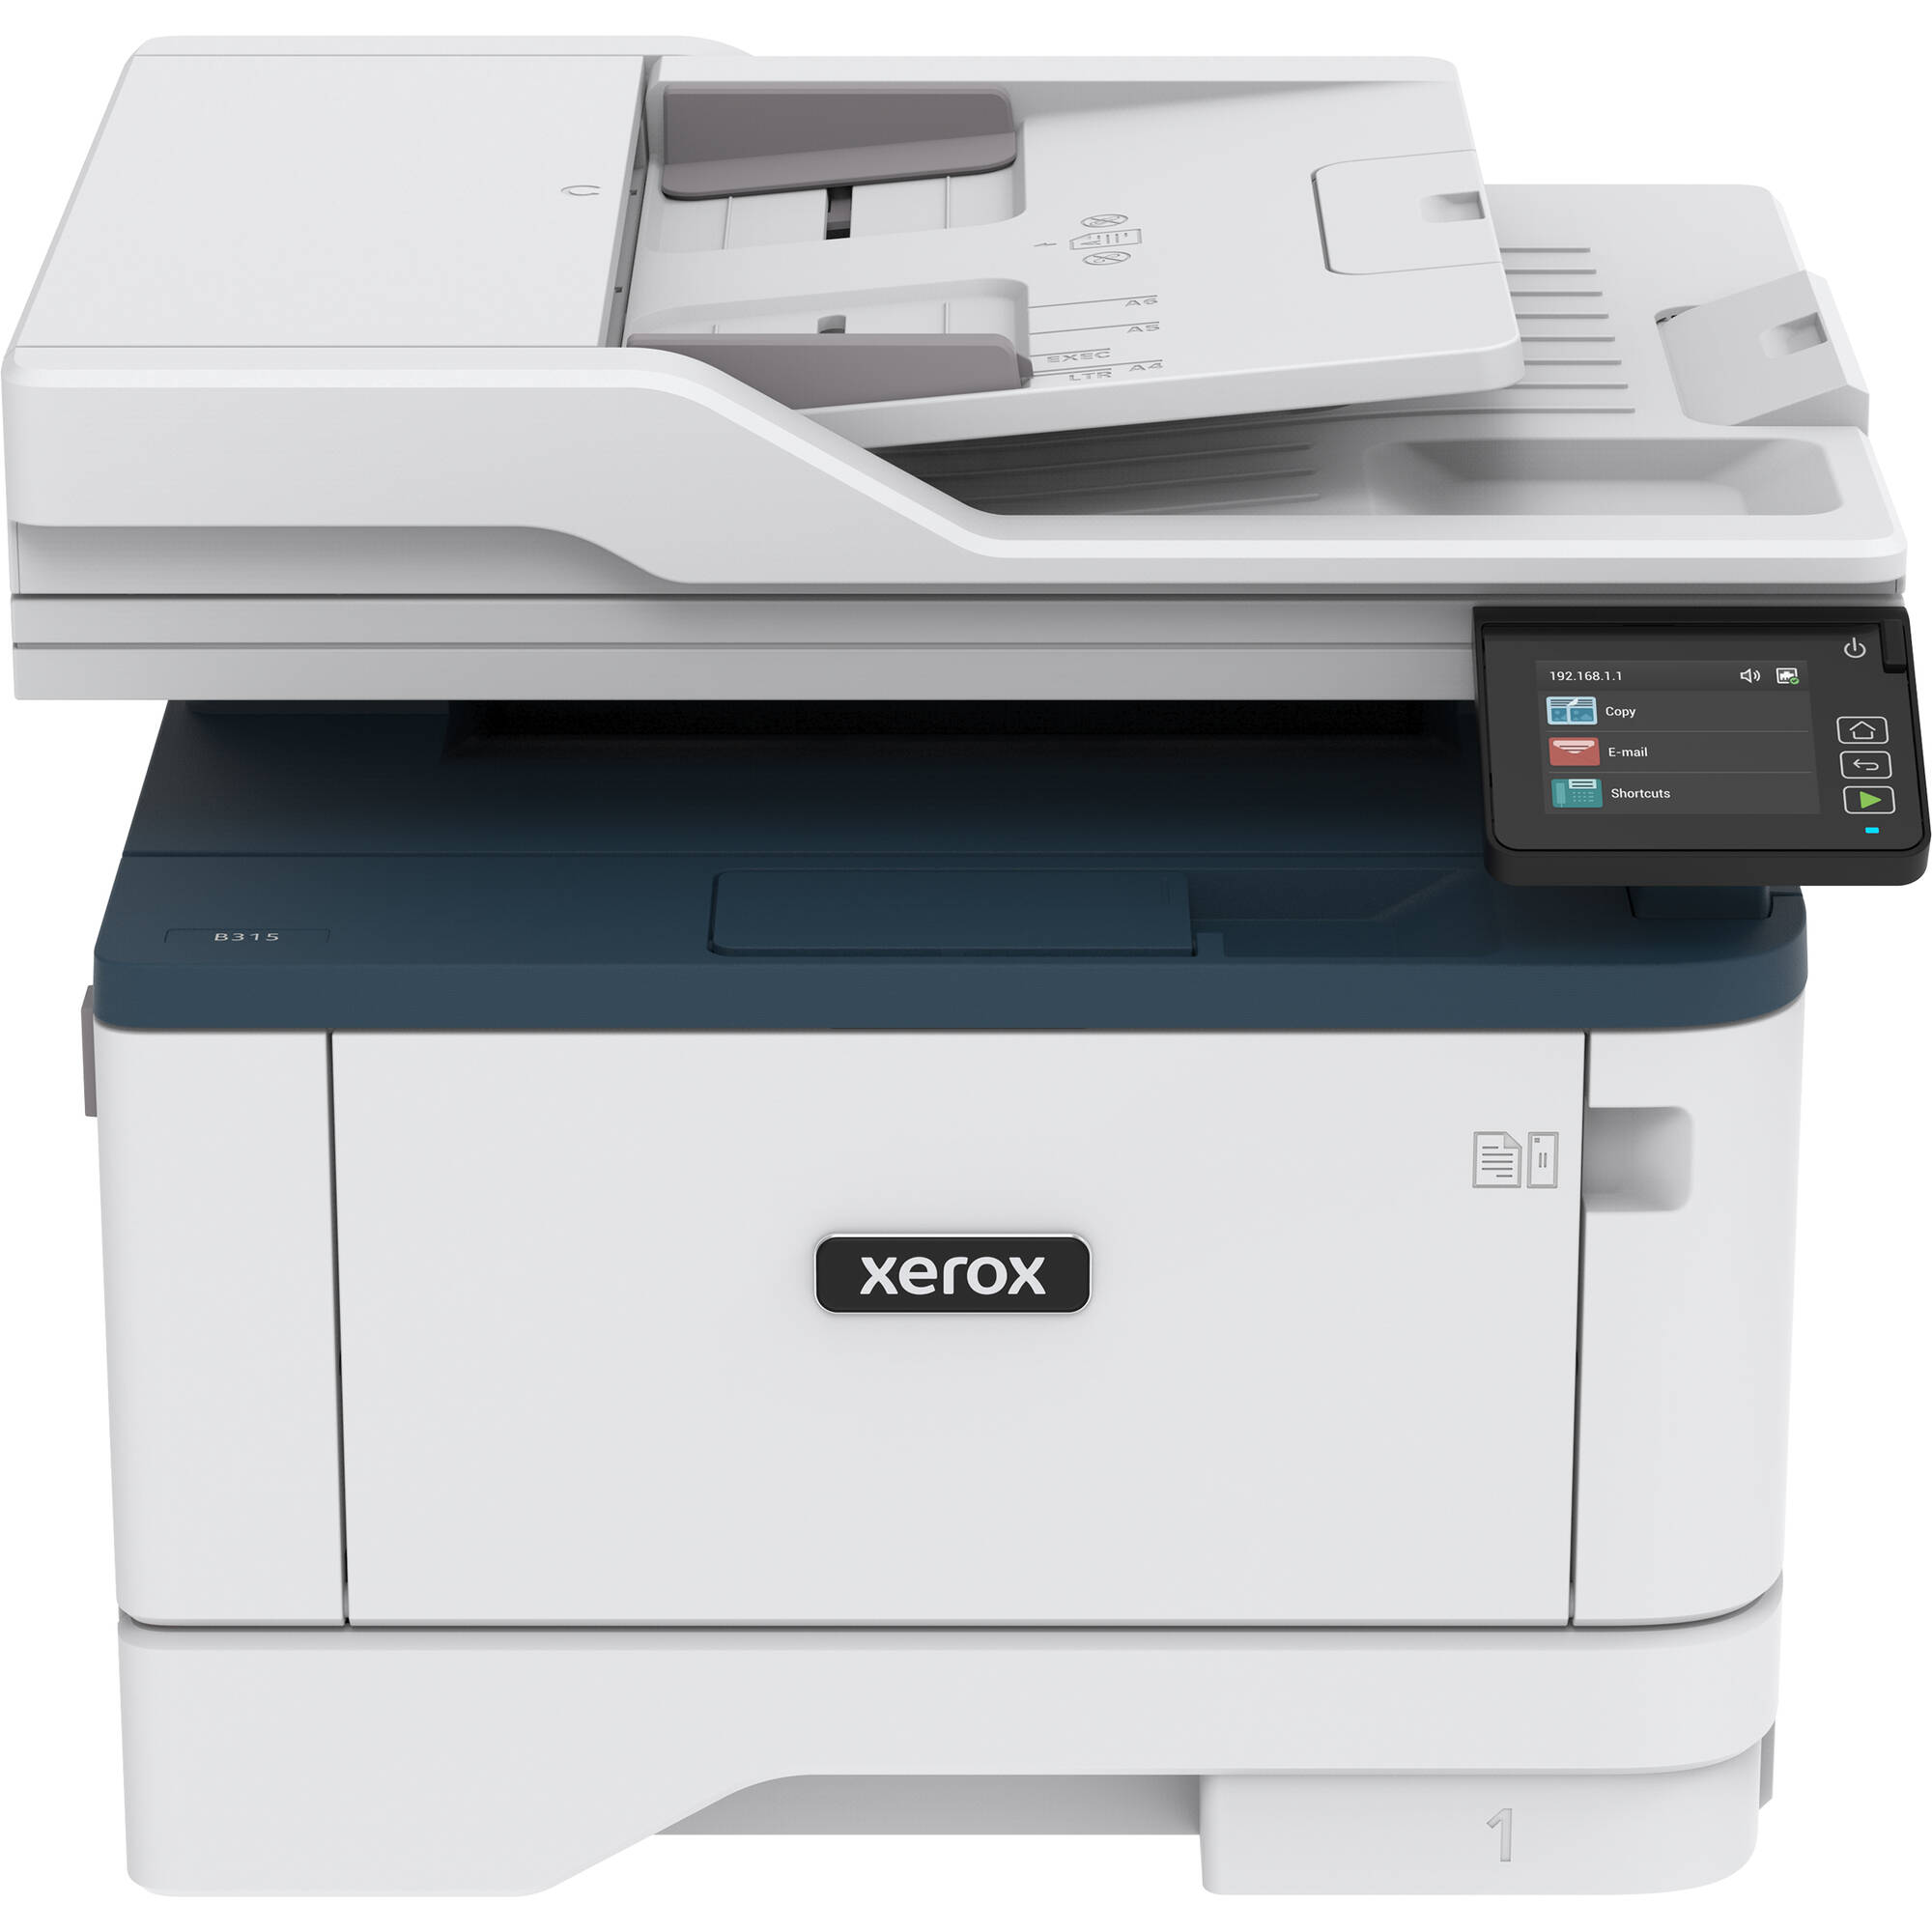 The Most Useful Xerox B315/DNI Wireless Duplex Monochrome Laser Printer - Especially For Small To Medium-Sized Business And Remote Employees